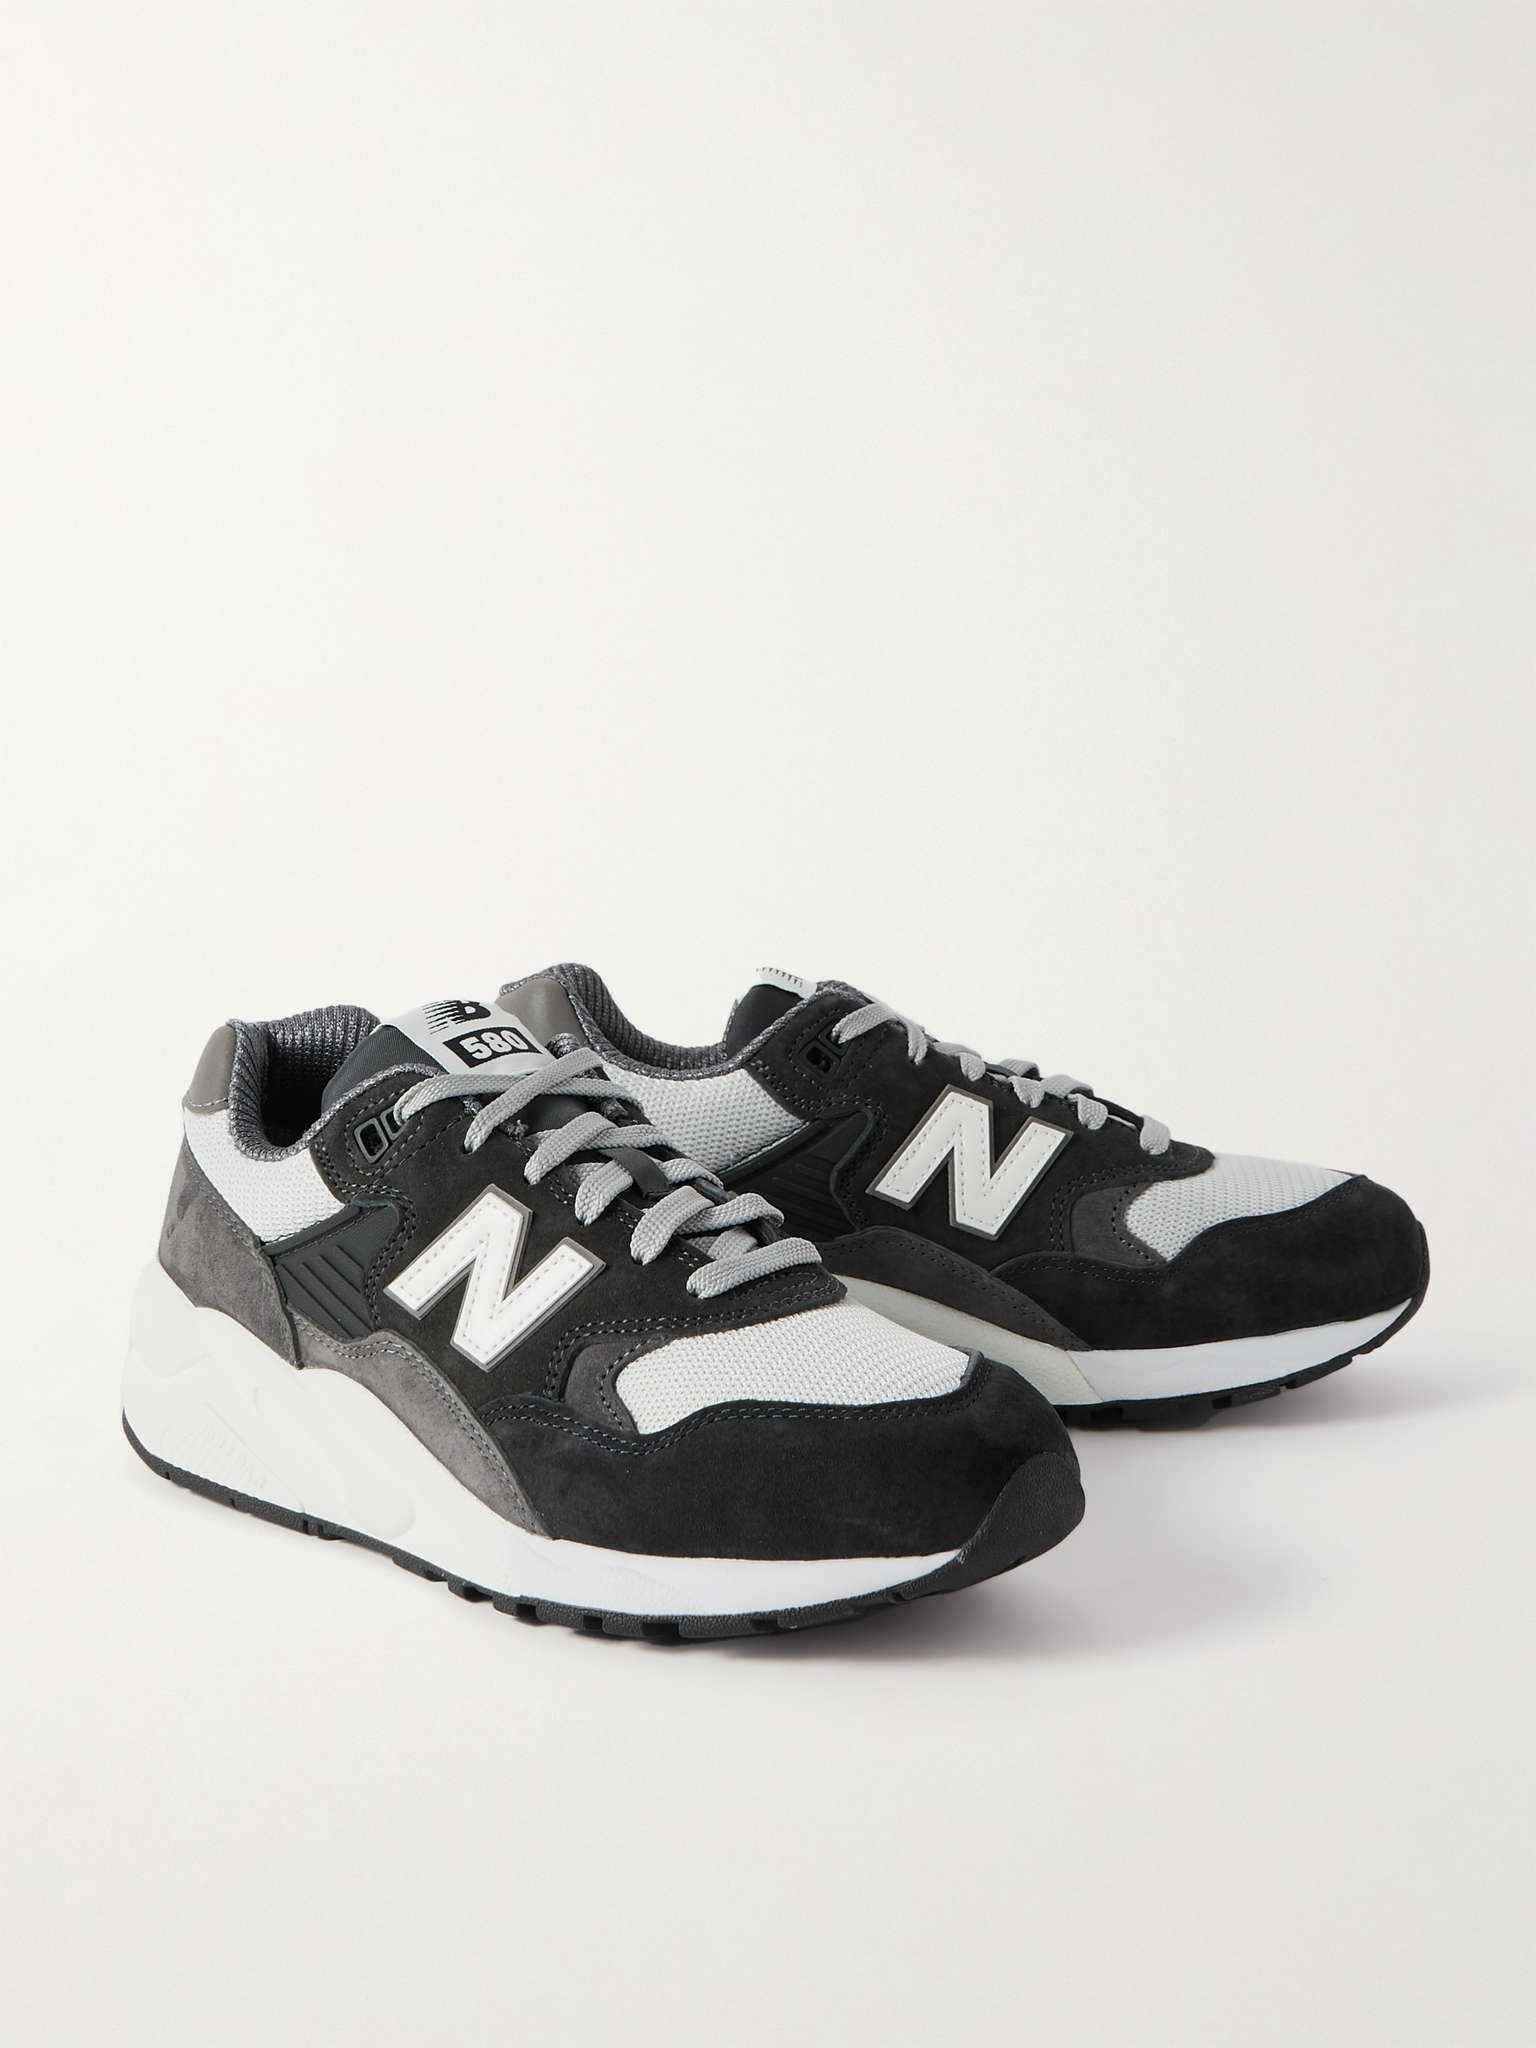 + New Balance 580 Suede and Mesh Sneakers - 4